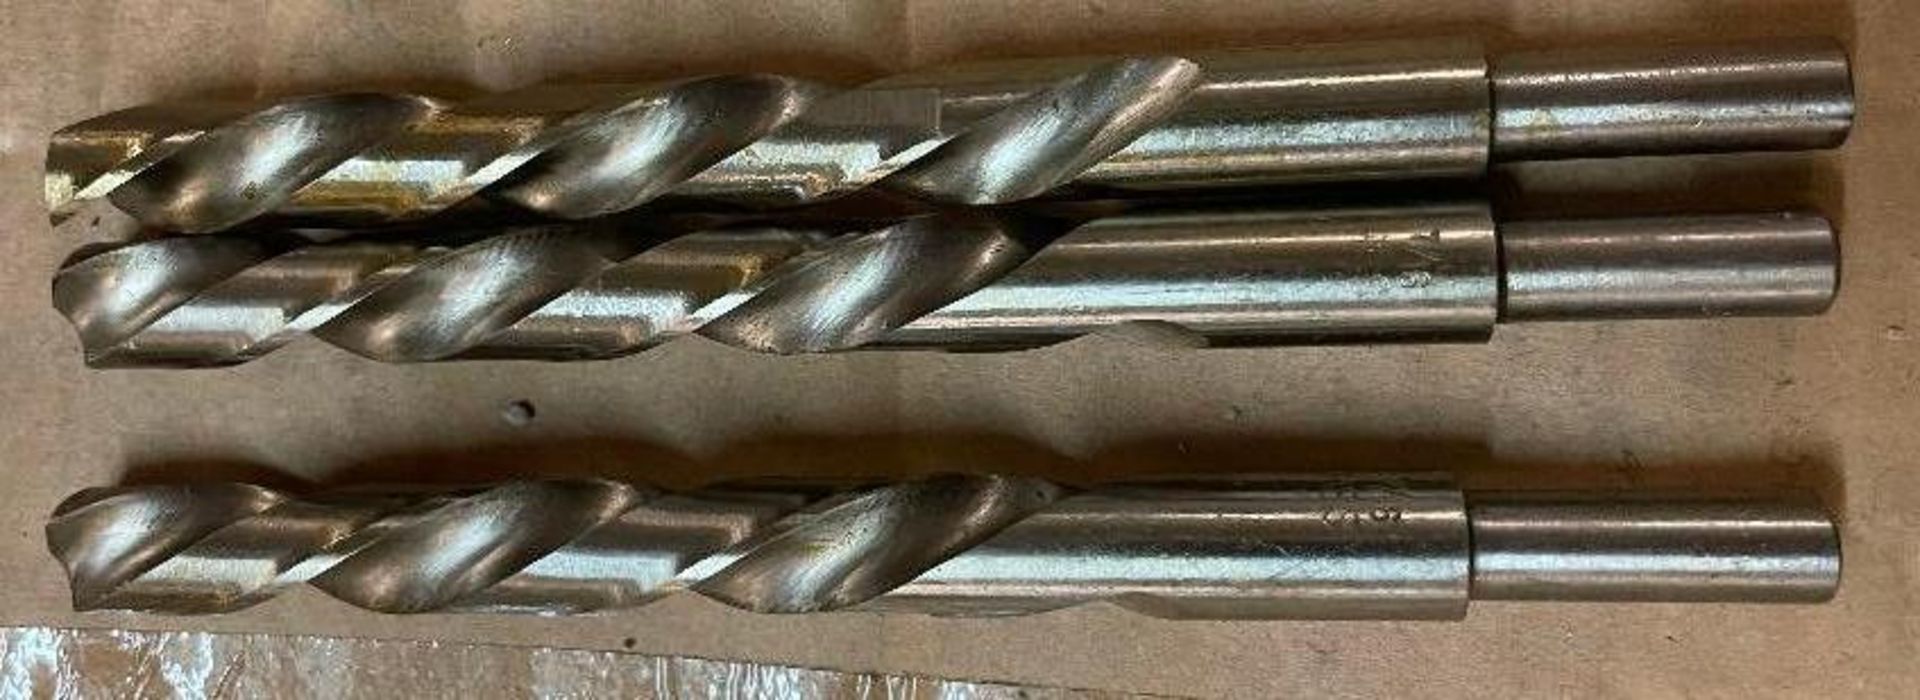 DESCRIPTION: (5) CASES OF 7/16" X 4" DRILL BITS. 250 PER CASE, 1250 IN LOT ADDITIONAL INFORMATION RE - Image 2 of 6